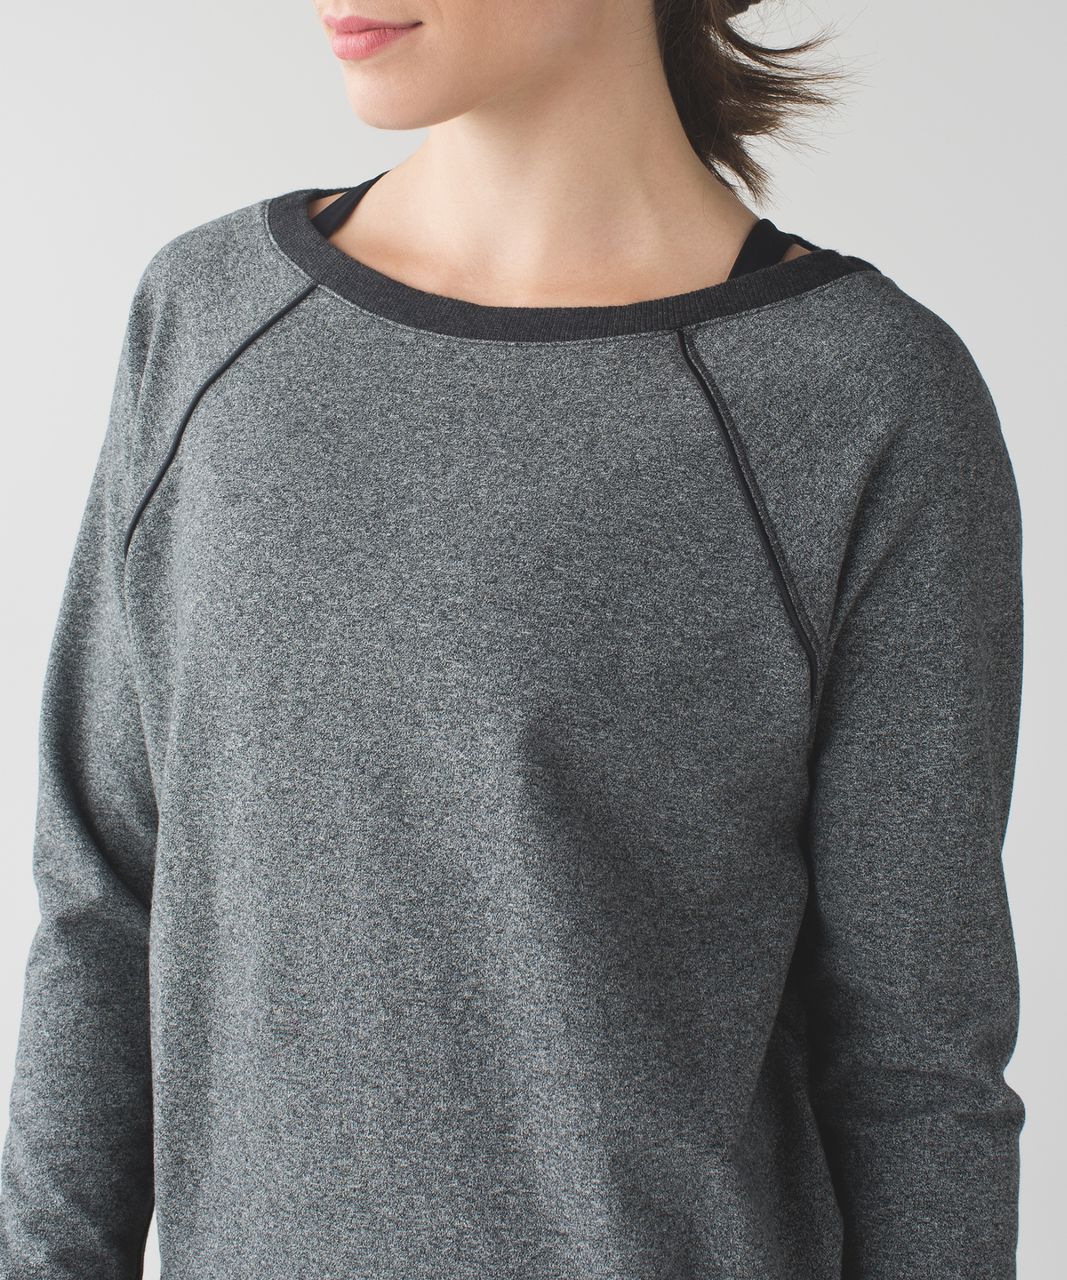 Lululemon Crew Love Pullover (First Release) - Heathered Speckled Black